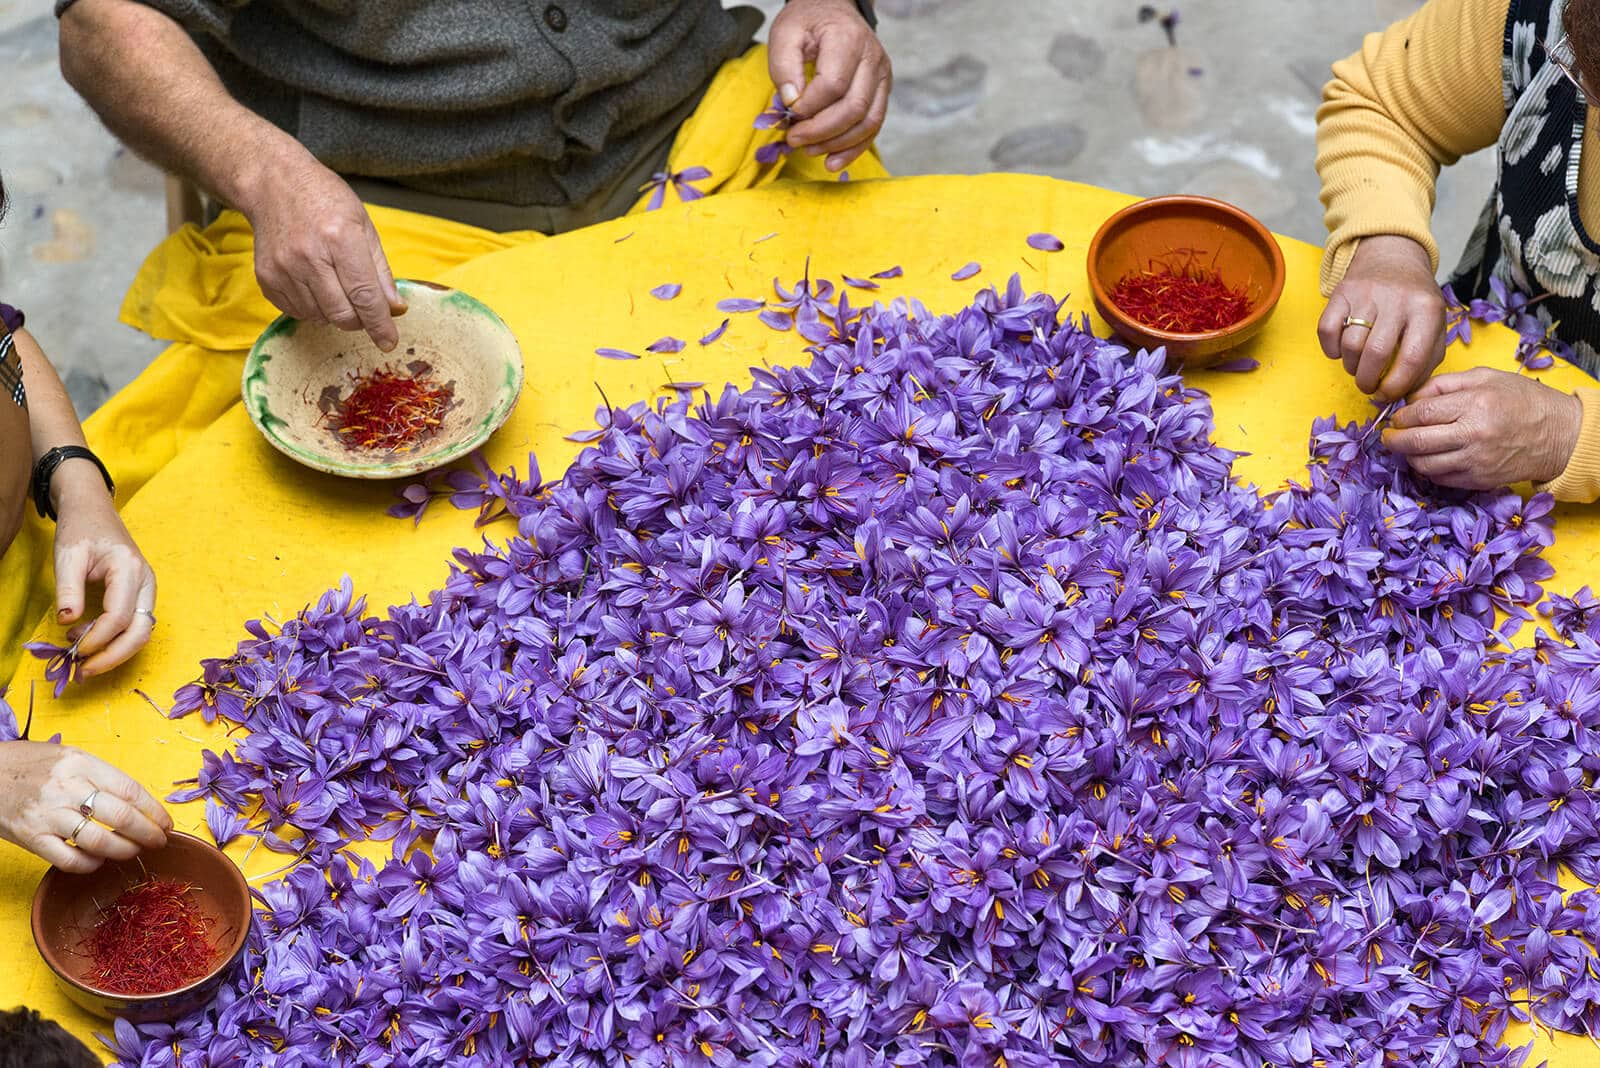 Three seated framers harvest red Saffron threads amongst a table of purple flowers